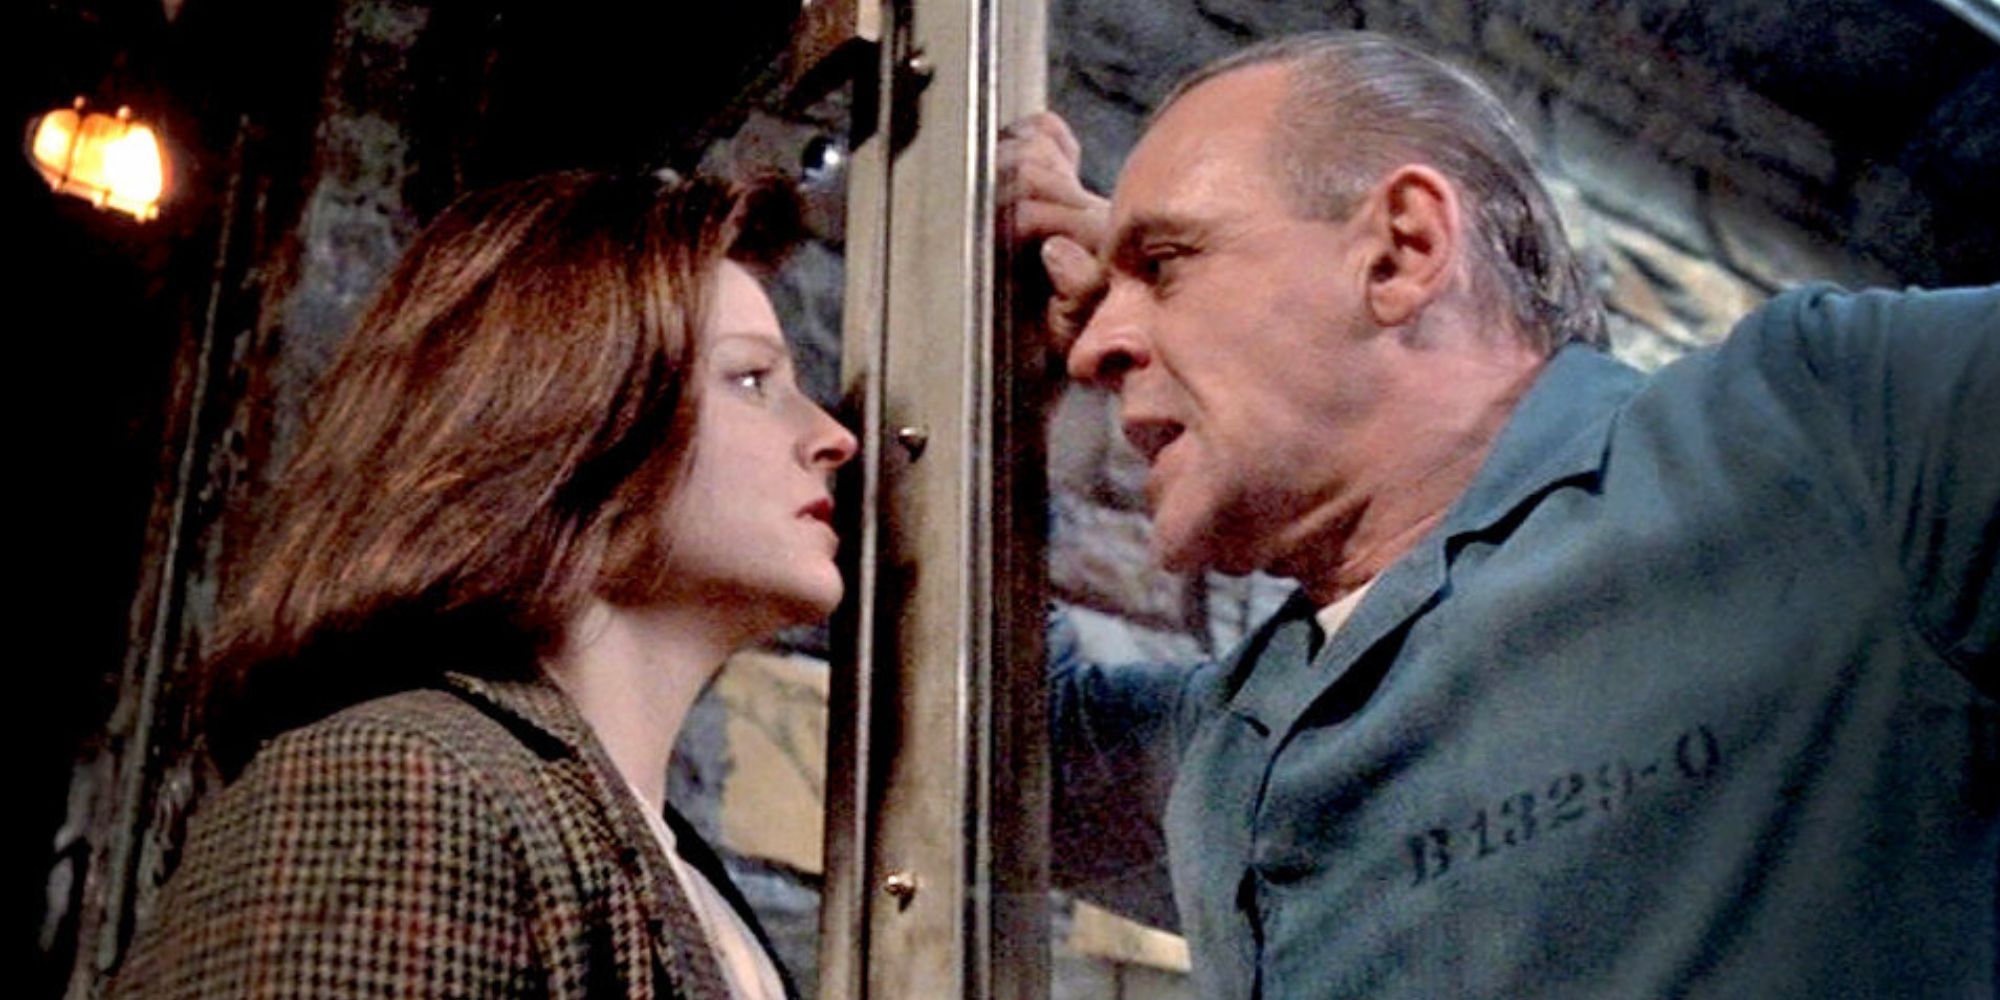 Jodi Foster looking at Anthony Hopkins behind the glass of his cell in The Silence of the Lambs